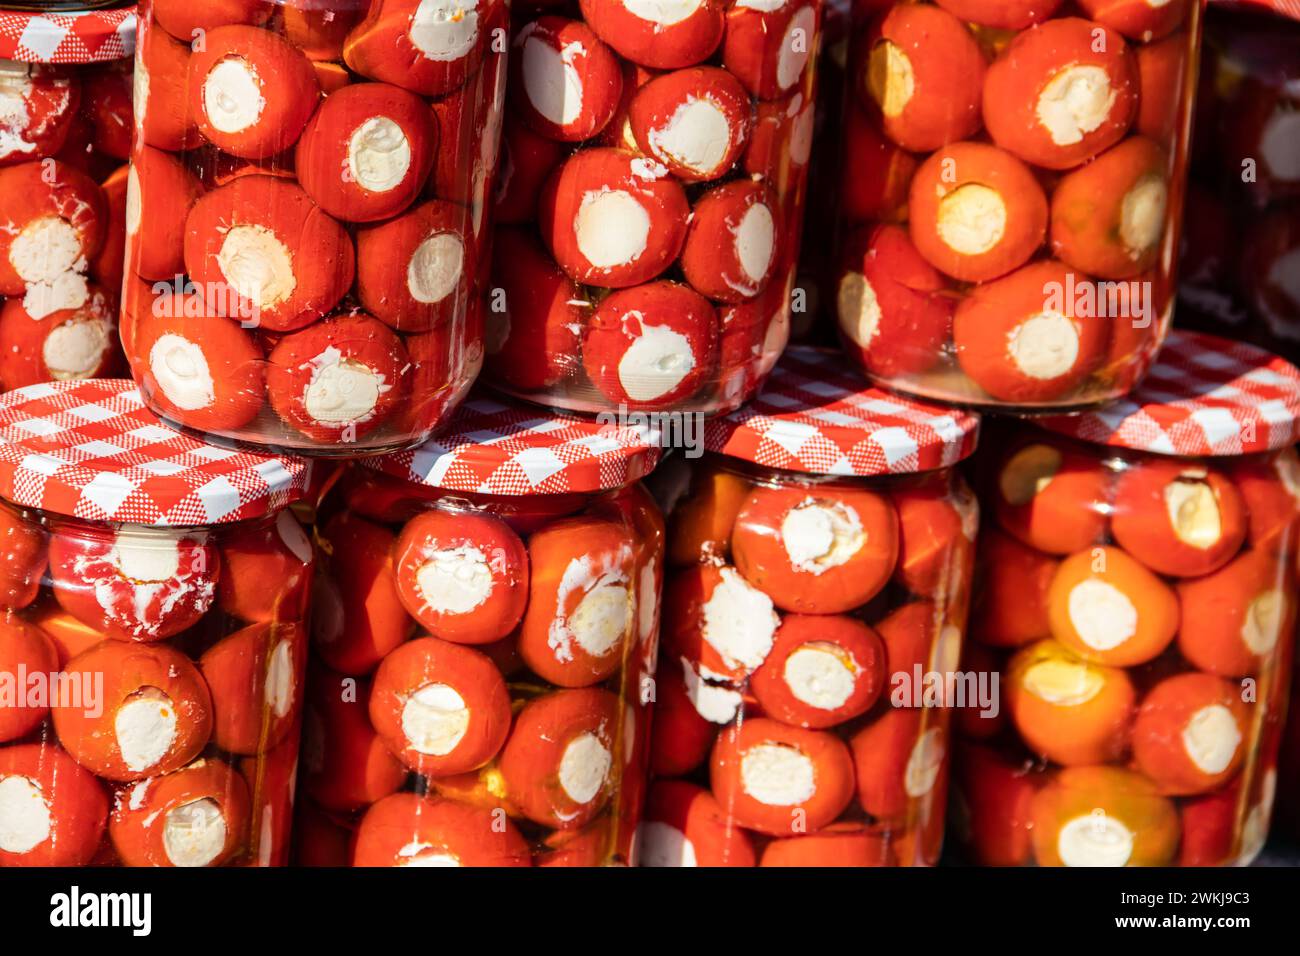 Homemade canned vegetables in cans, pickled small cherry tomatoes stuffed with cheese and onion, in a rural style of Serbian country side Stock Photo